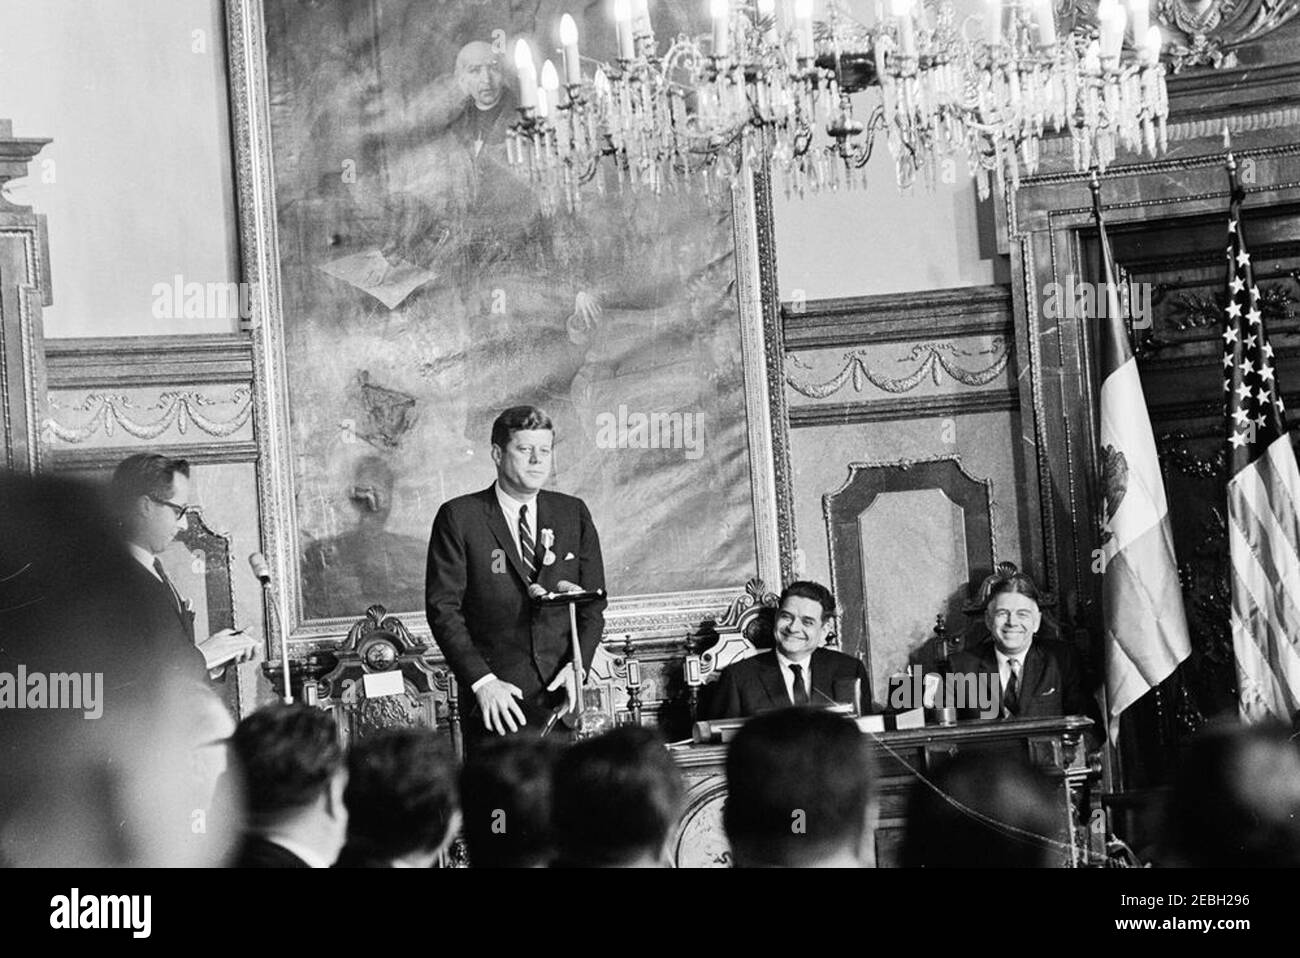 Trip to Mexico: Ceremony at City Hall, 5:05PM. President John F. Kennedy delivers remarks at a ceremony in honor of his visit to Mexico City. Governor of the Federal District, Ernesto P. Uruchurtu, presented President Kennedy with keys to the City of Mexico, a commemorative medal, and a scroll during the ceremony. Pictured at desk (L-R): U.S. State Department interpreter, Donald Barnes (mostly hidden); President Kennedy; Mr. Uruchurtu; U.S. Assistant Secretary of State for Inter-American Affairs, Edwin M. Martin. Salu00f3n de Cabildos (Council Room), Antiguo Palacio del Ayuntamiento (Old City Stock Photo